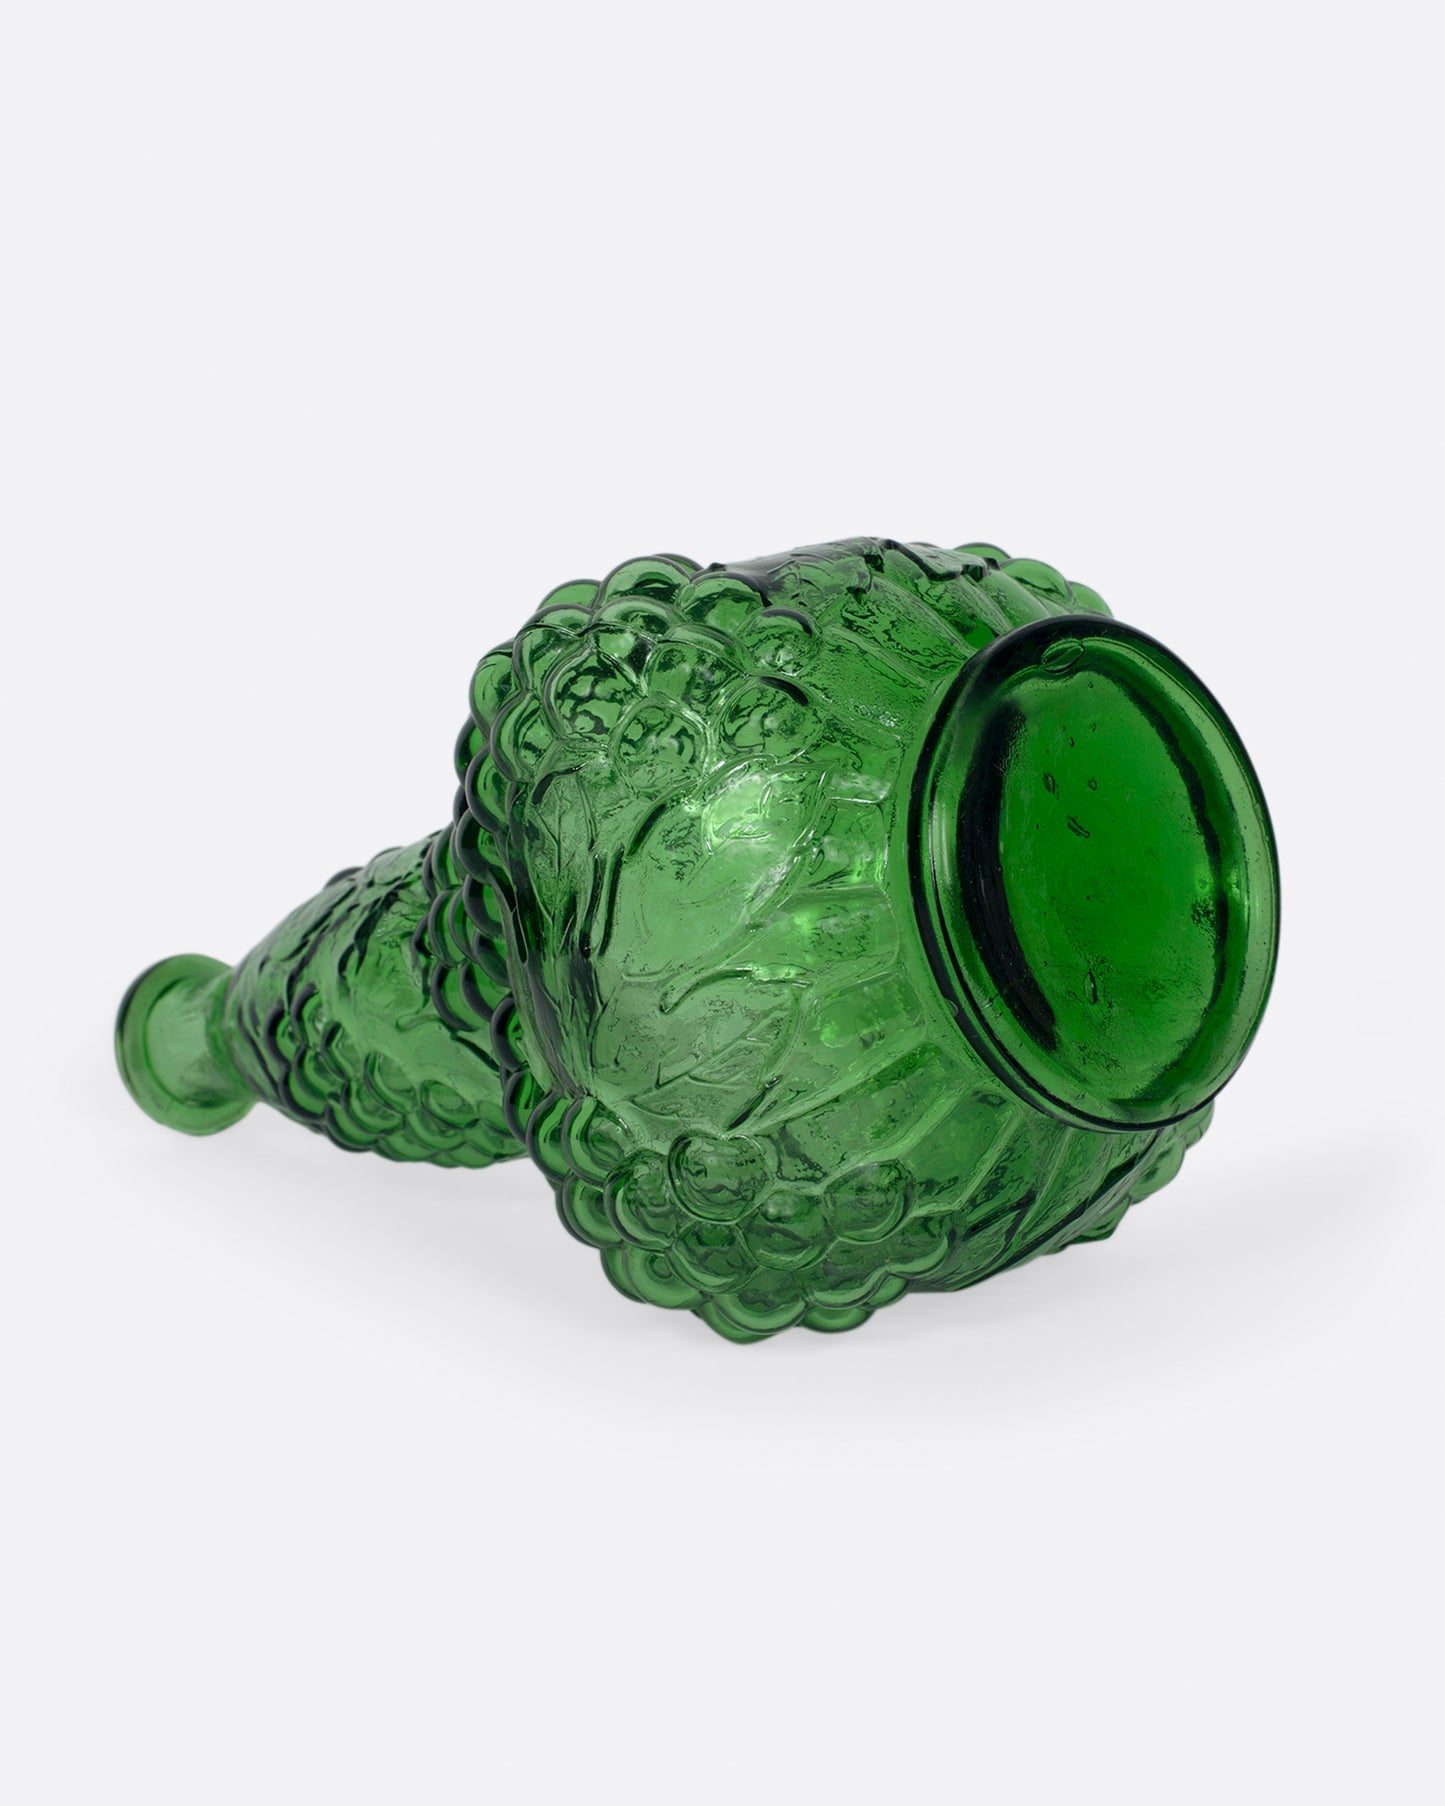 A tall, bottle green glass decanter with a textured stopper.